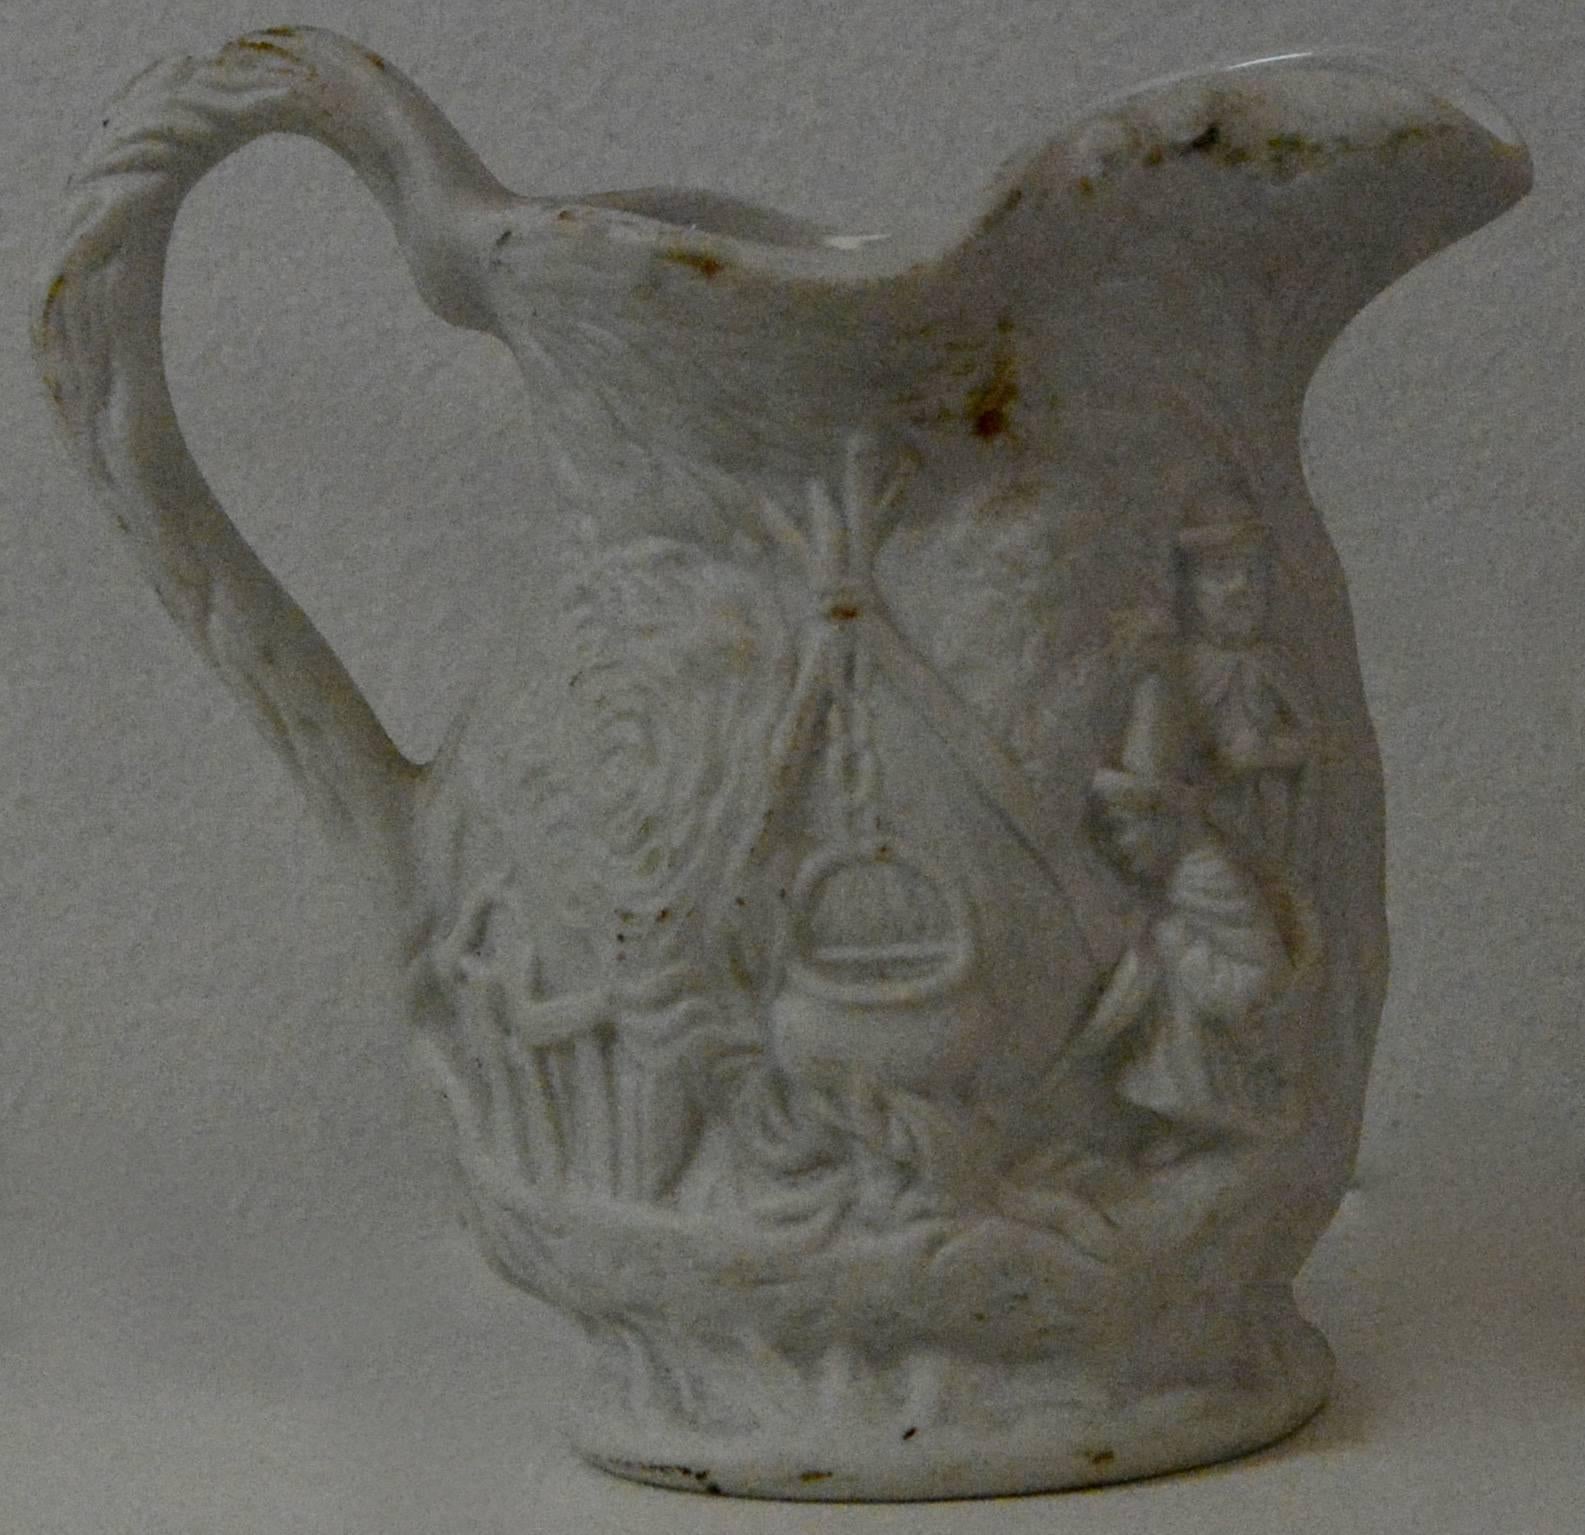 We are offering you a lovely Parian ware miniature pitcher formed from white earthenware. The details on the piece are very detailed the pitcher is stamped on the bottom.